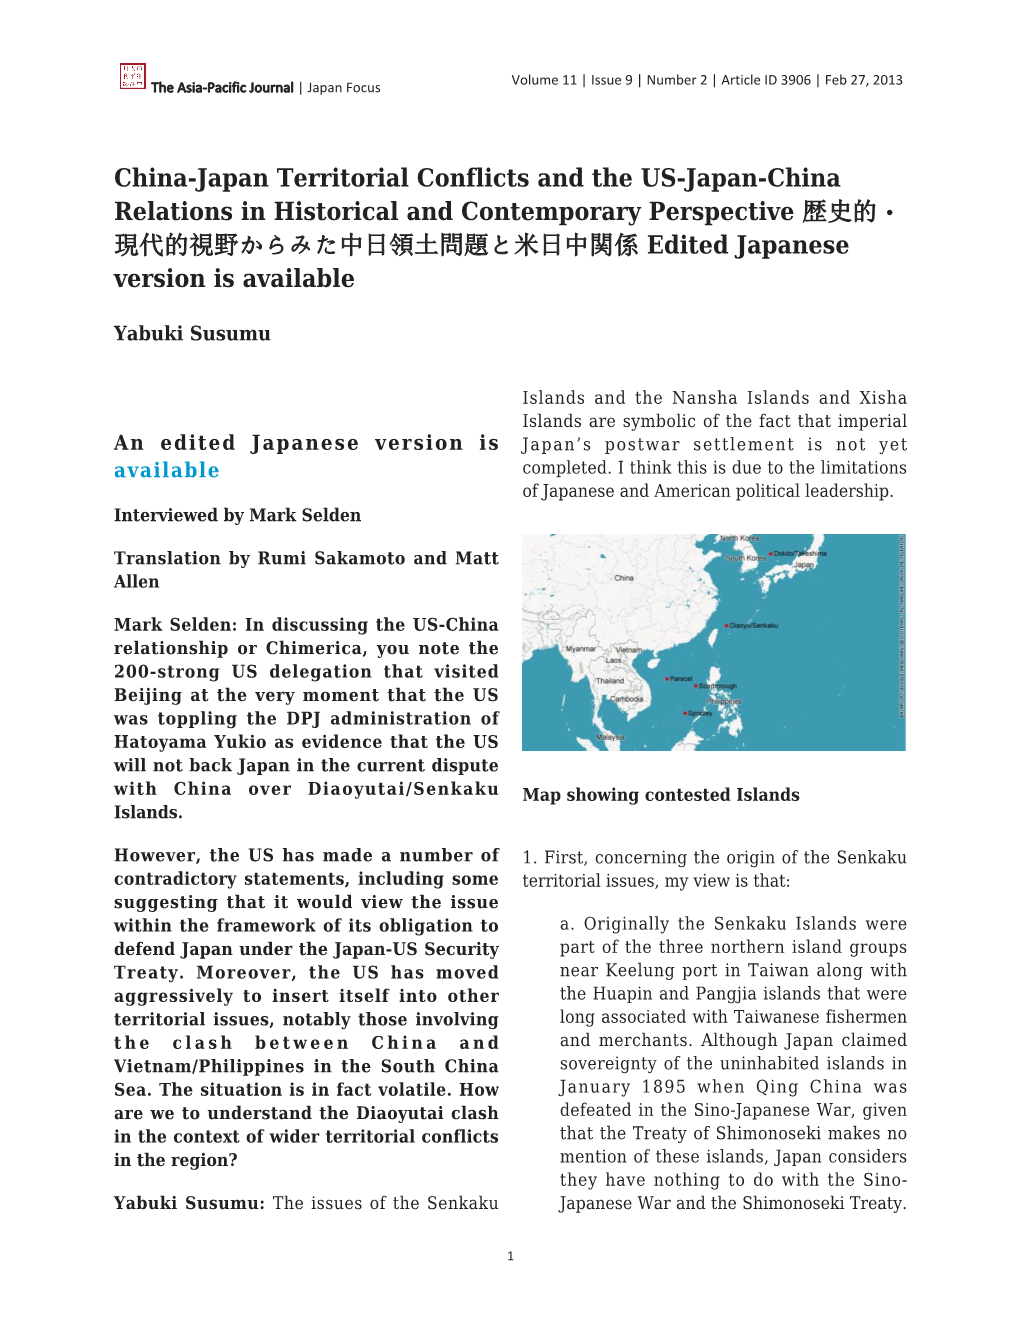 China-Japan Territorial Conflicts and the US-Japan-China Relations In